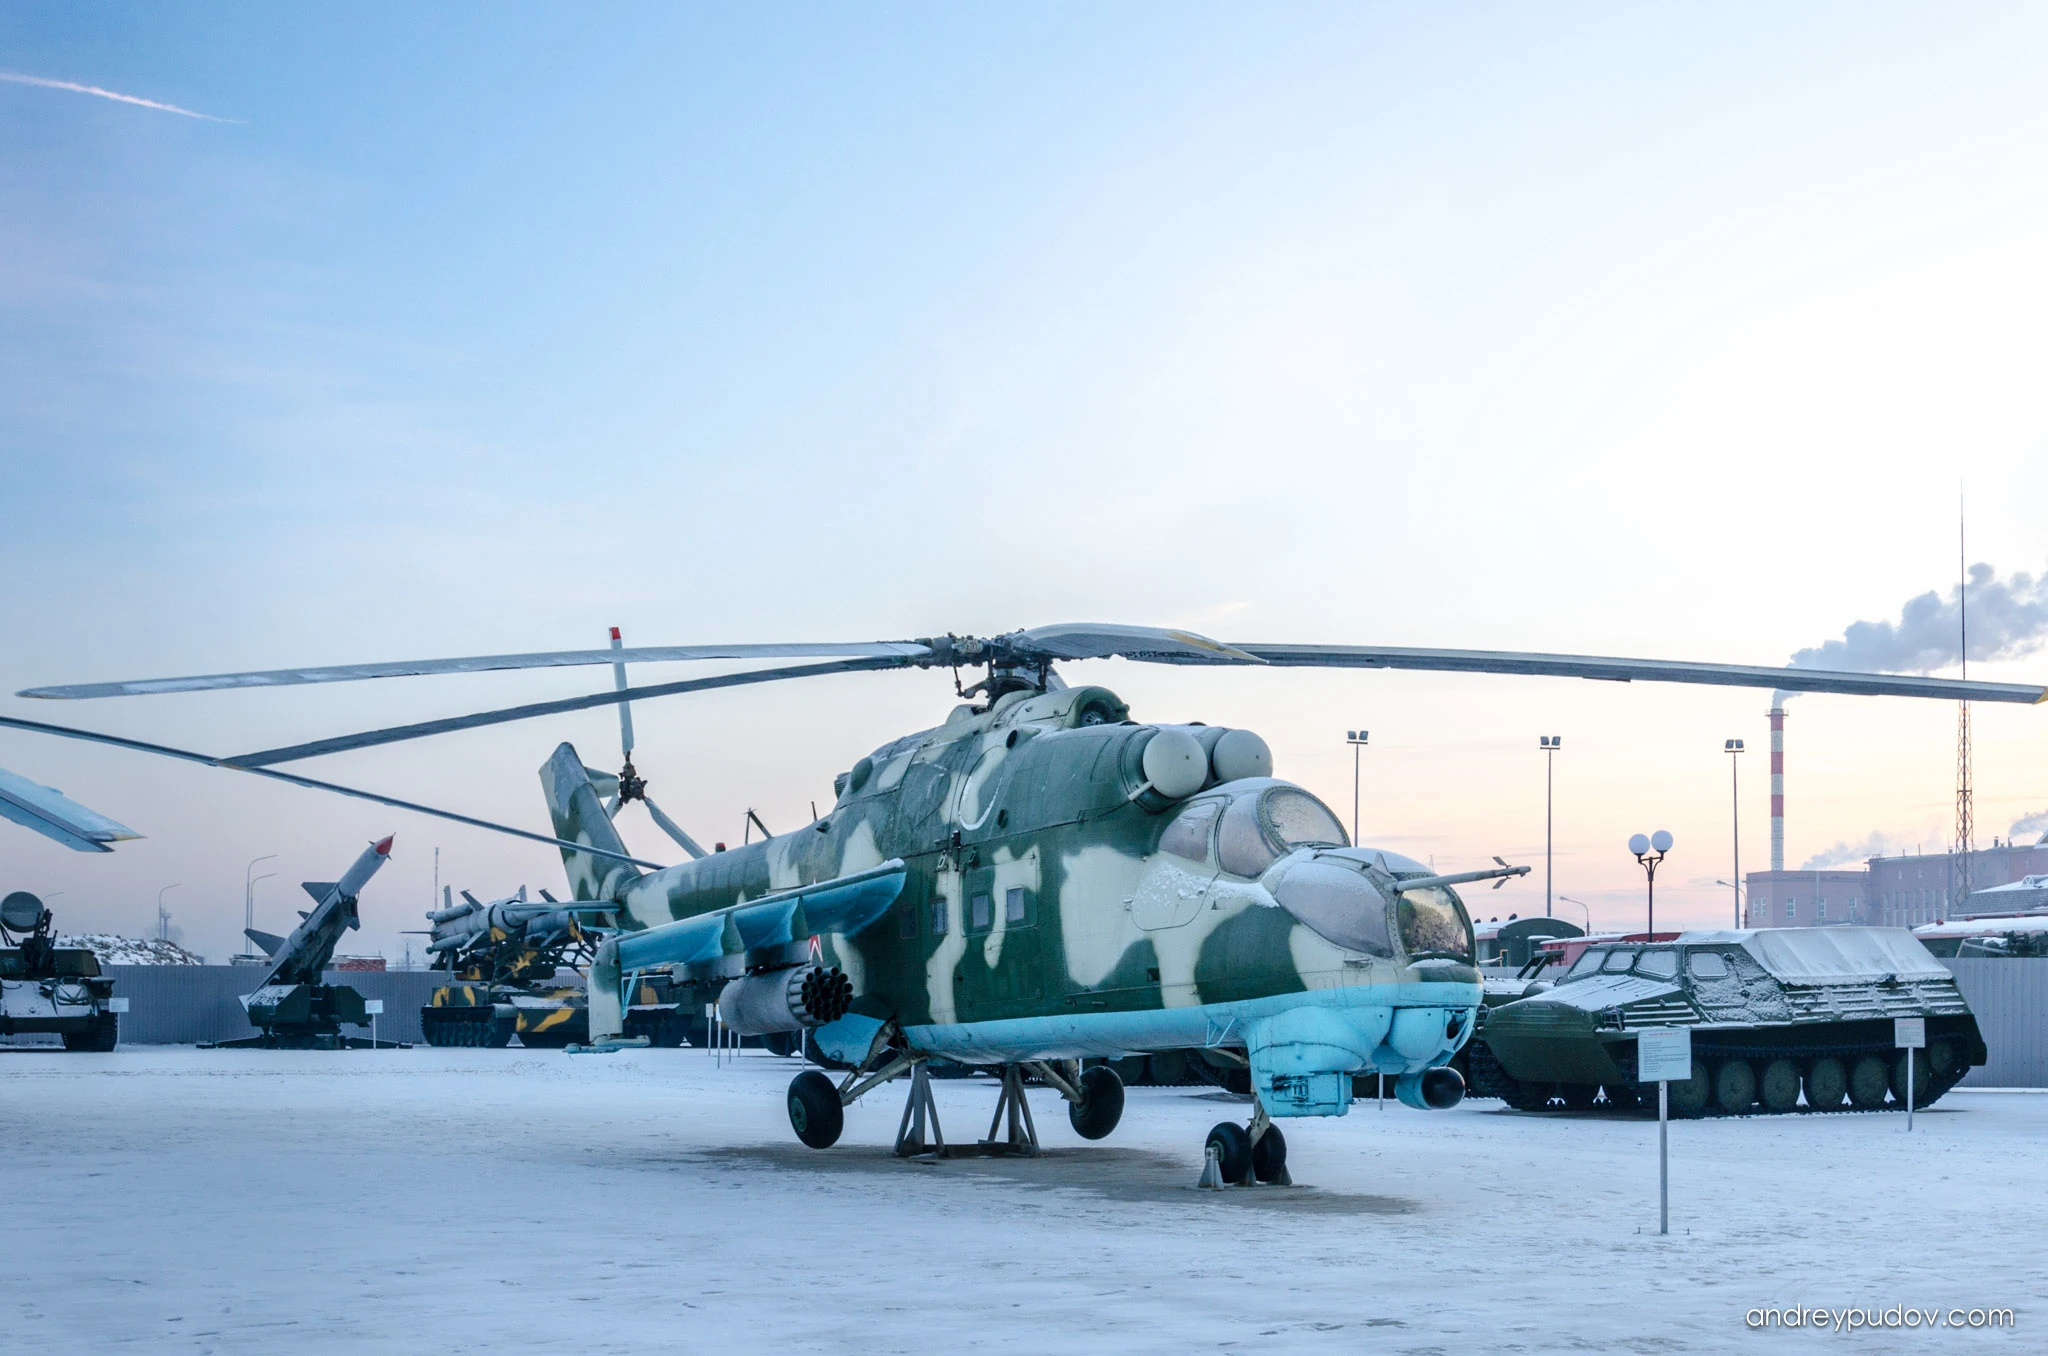 Battle Glory of the Urals - The Mil Mi-24 is a large helicopter gunship, attack helicopter, and low-capacity troop transport with room for eight passengers. It is produced by Mil Moscow Helicopter Plant and has been operated since 1972 by the Soviet Air Force and its successors, along with 48 other nations.